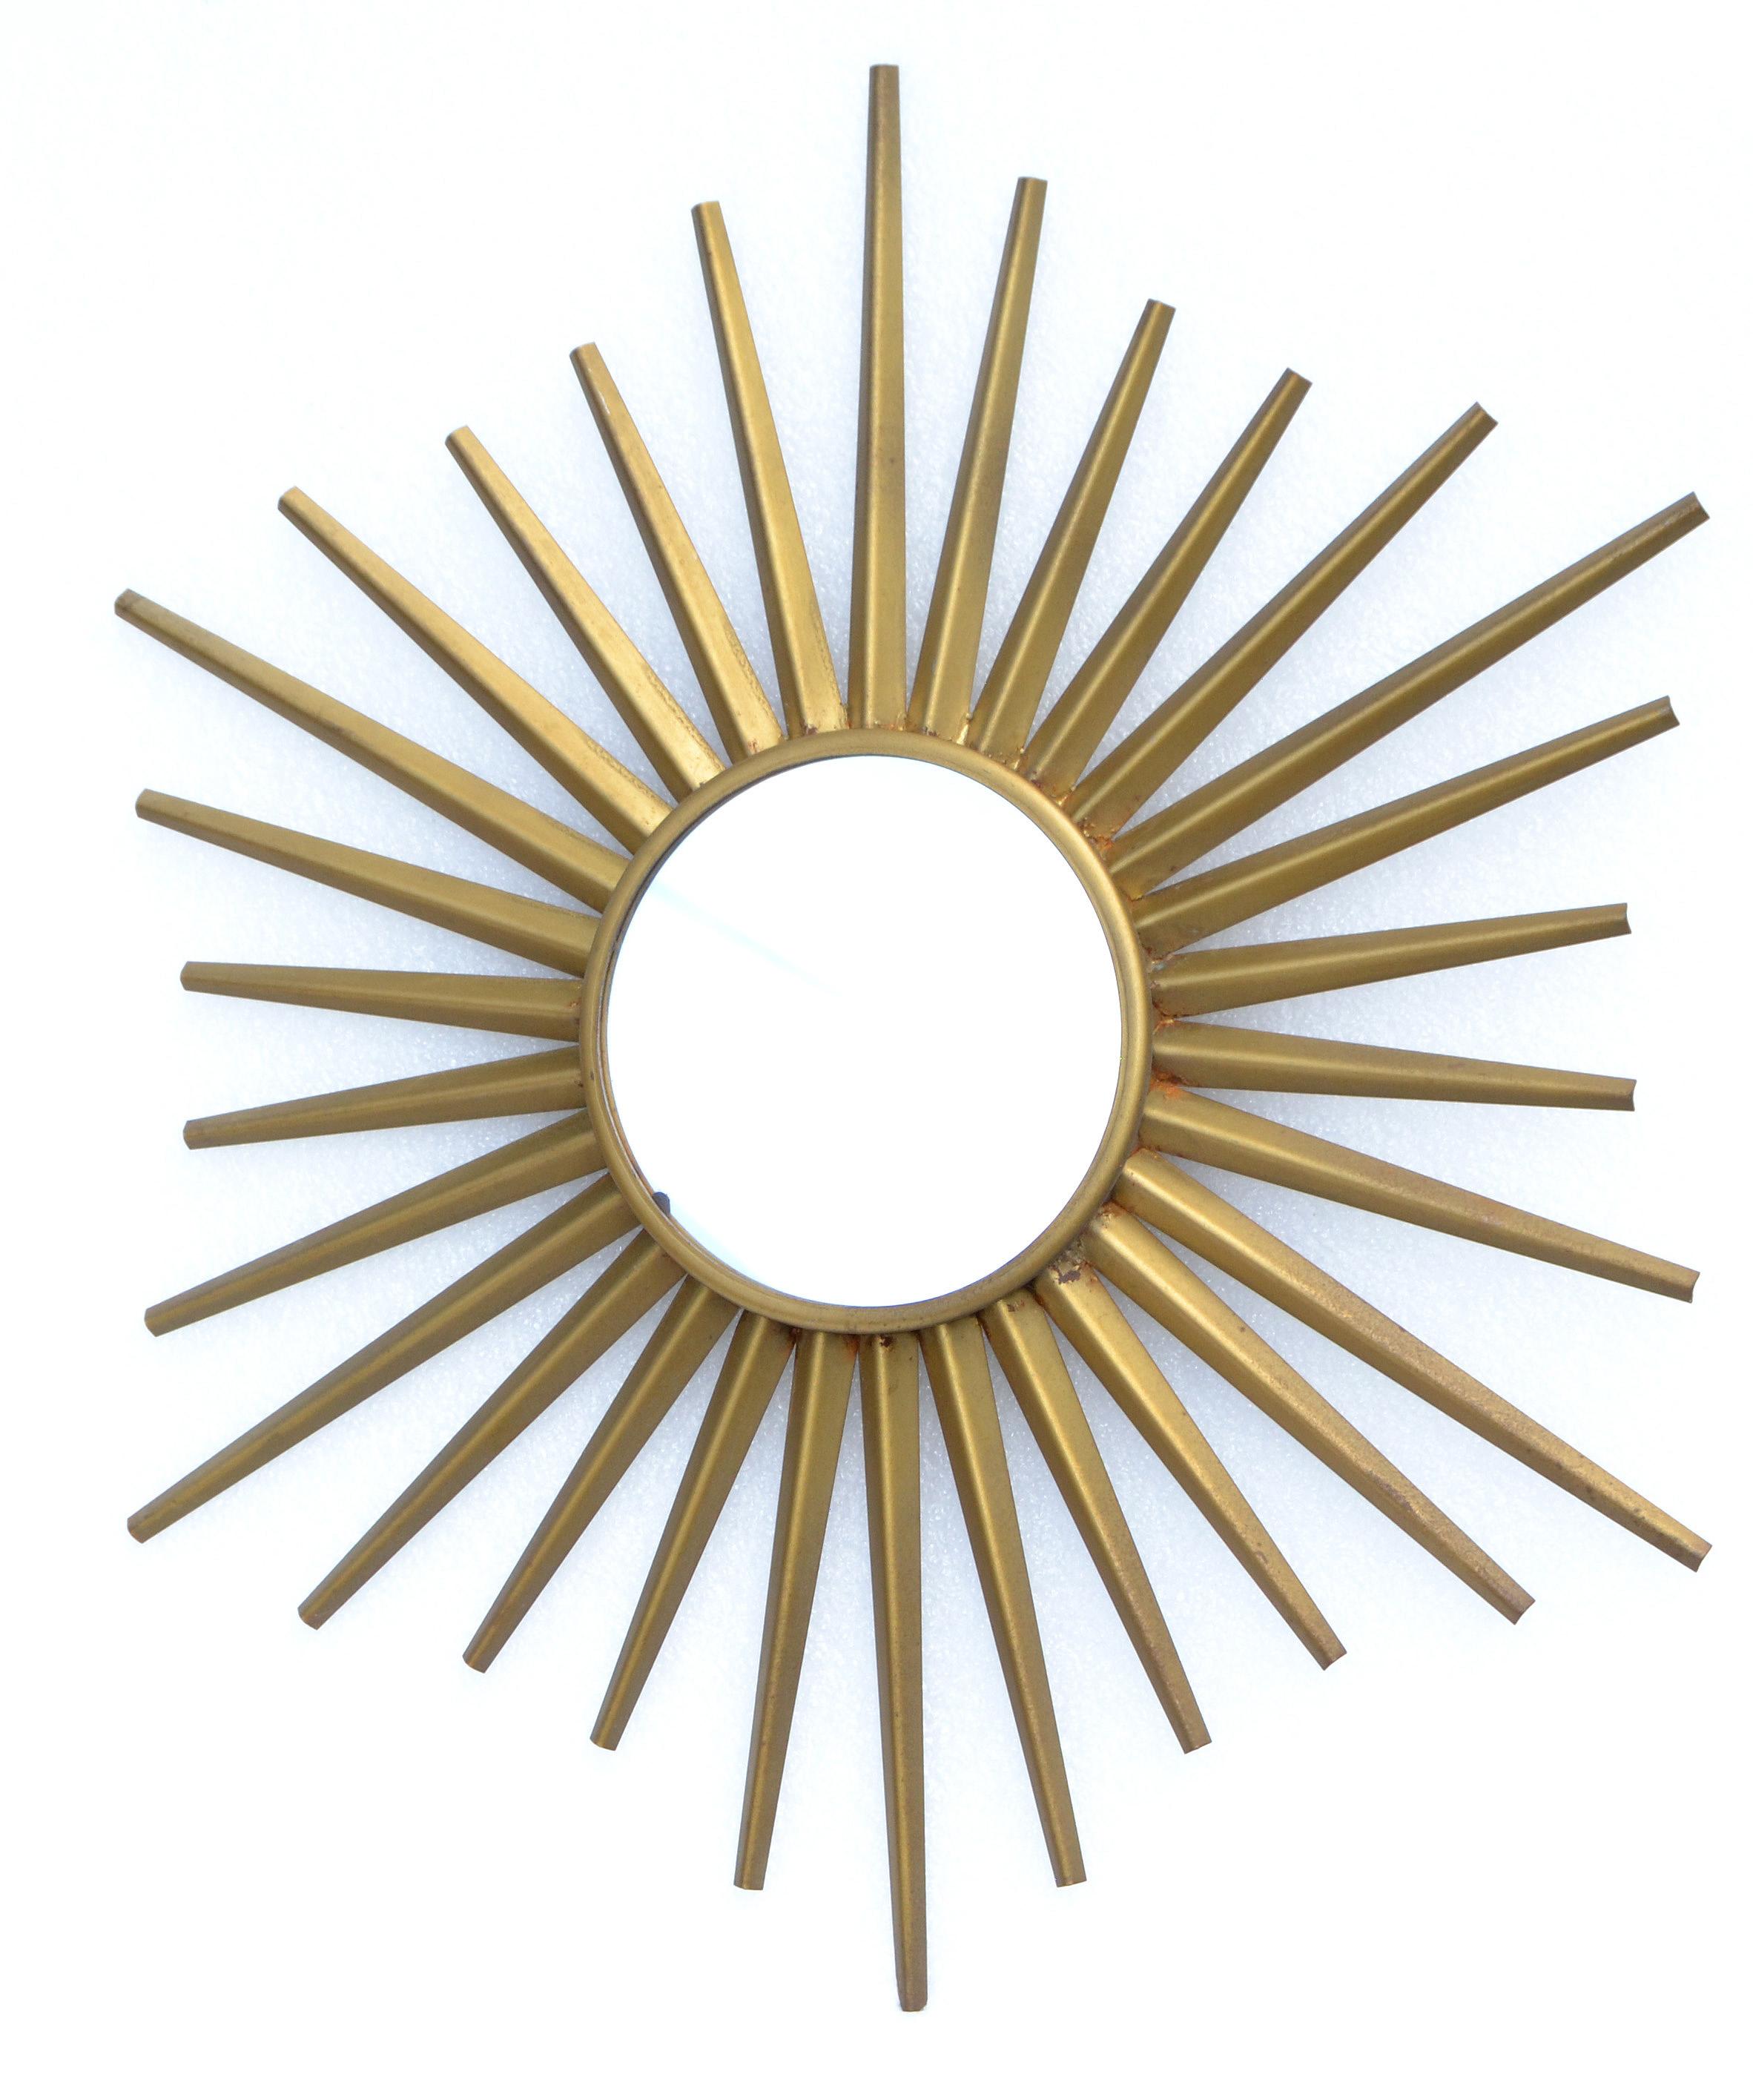 Mid-20th Century Sunburst Mirror in the Style of Vallauris French Mid-Century Modern Wall Mirror For Sale